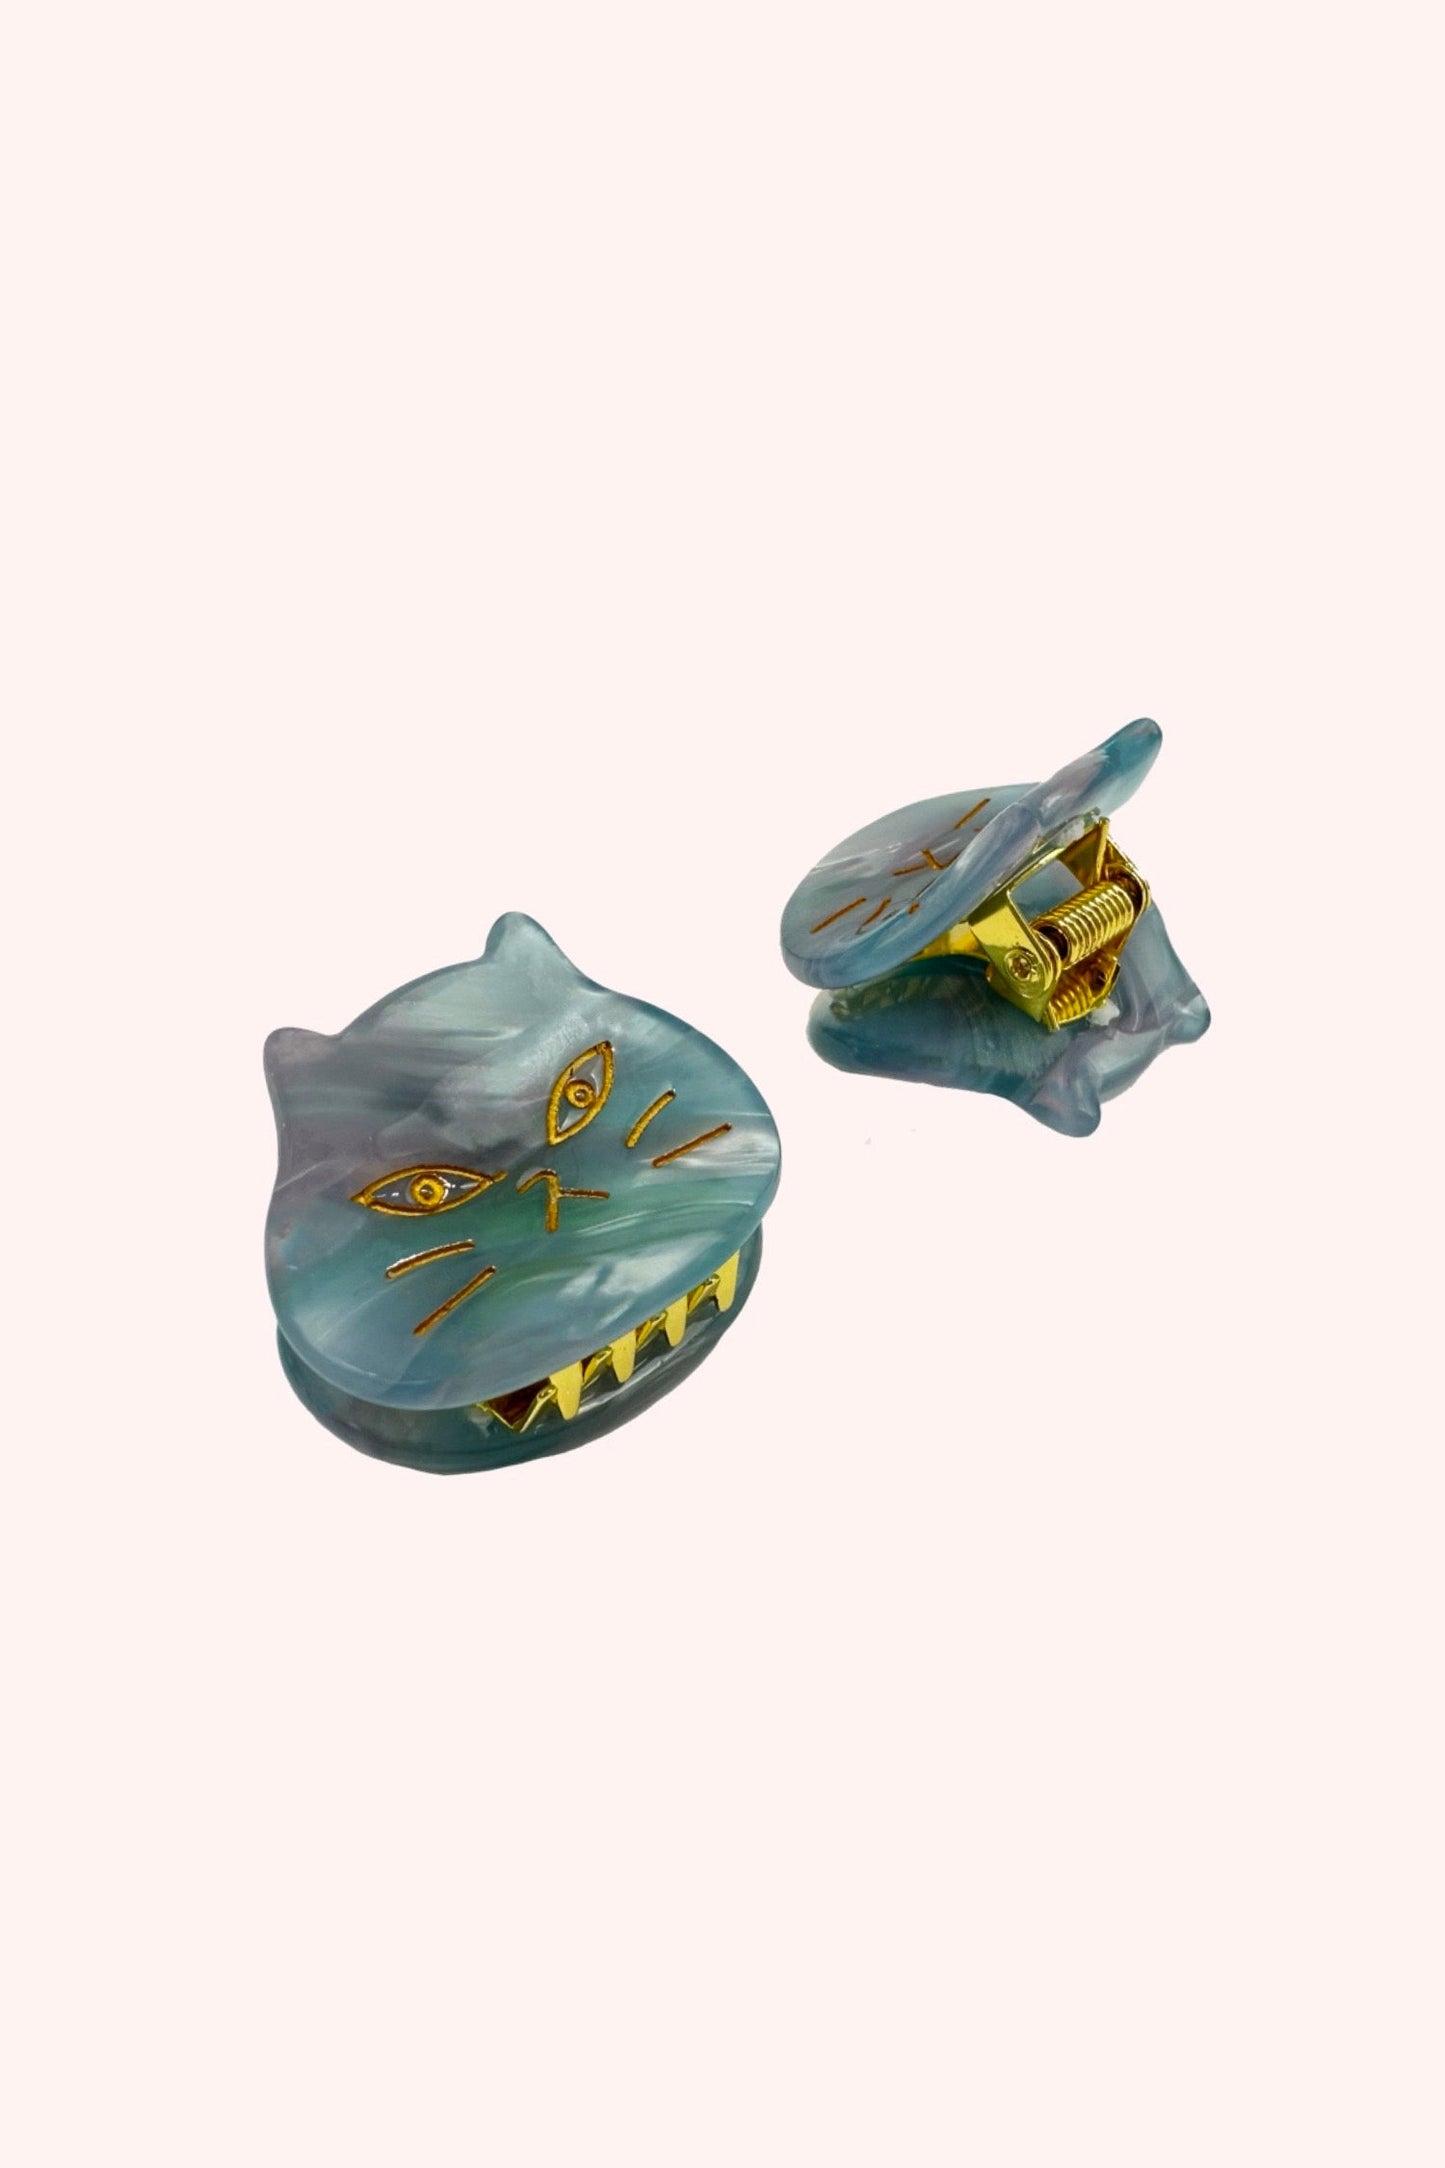 Cat's Meow Jaw Clip Pair, Sky Blue, cat head on a golden jaw clip to add some fun to your hairstyle